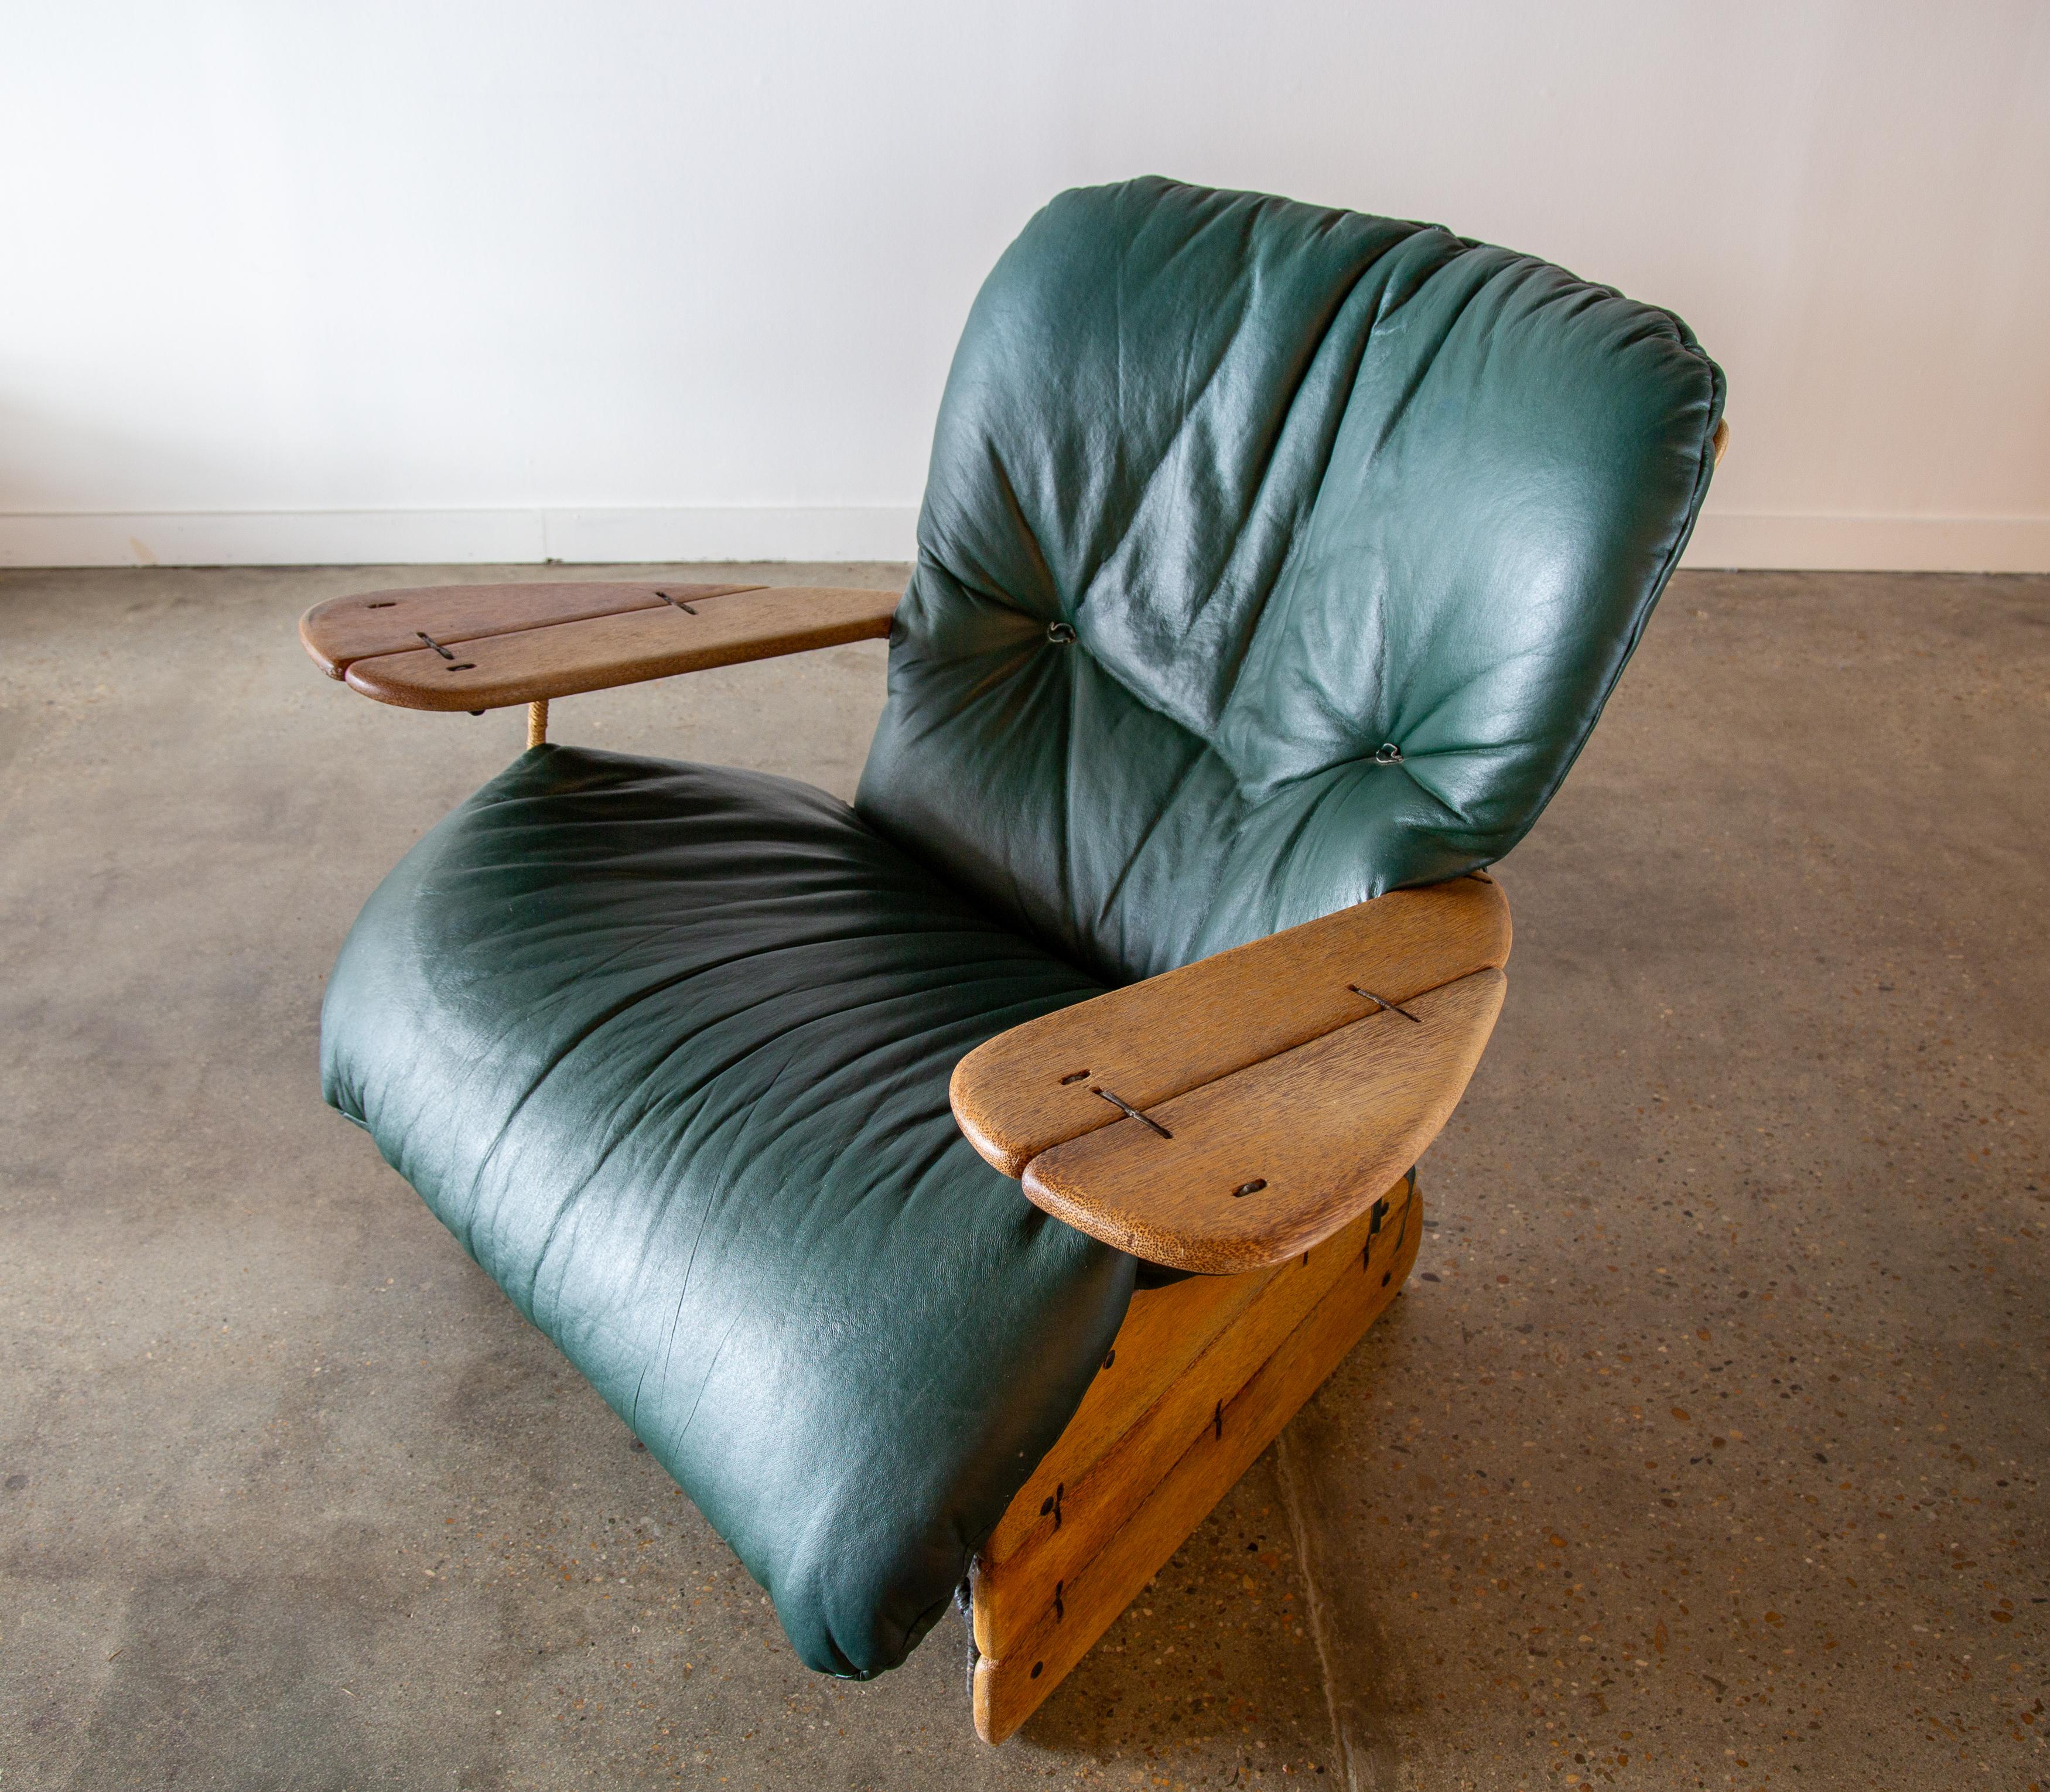 Contemporary Pacific Green Havanna Chair Palmwood and Green Leather c. 2000s